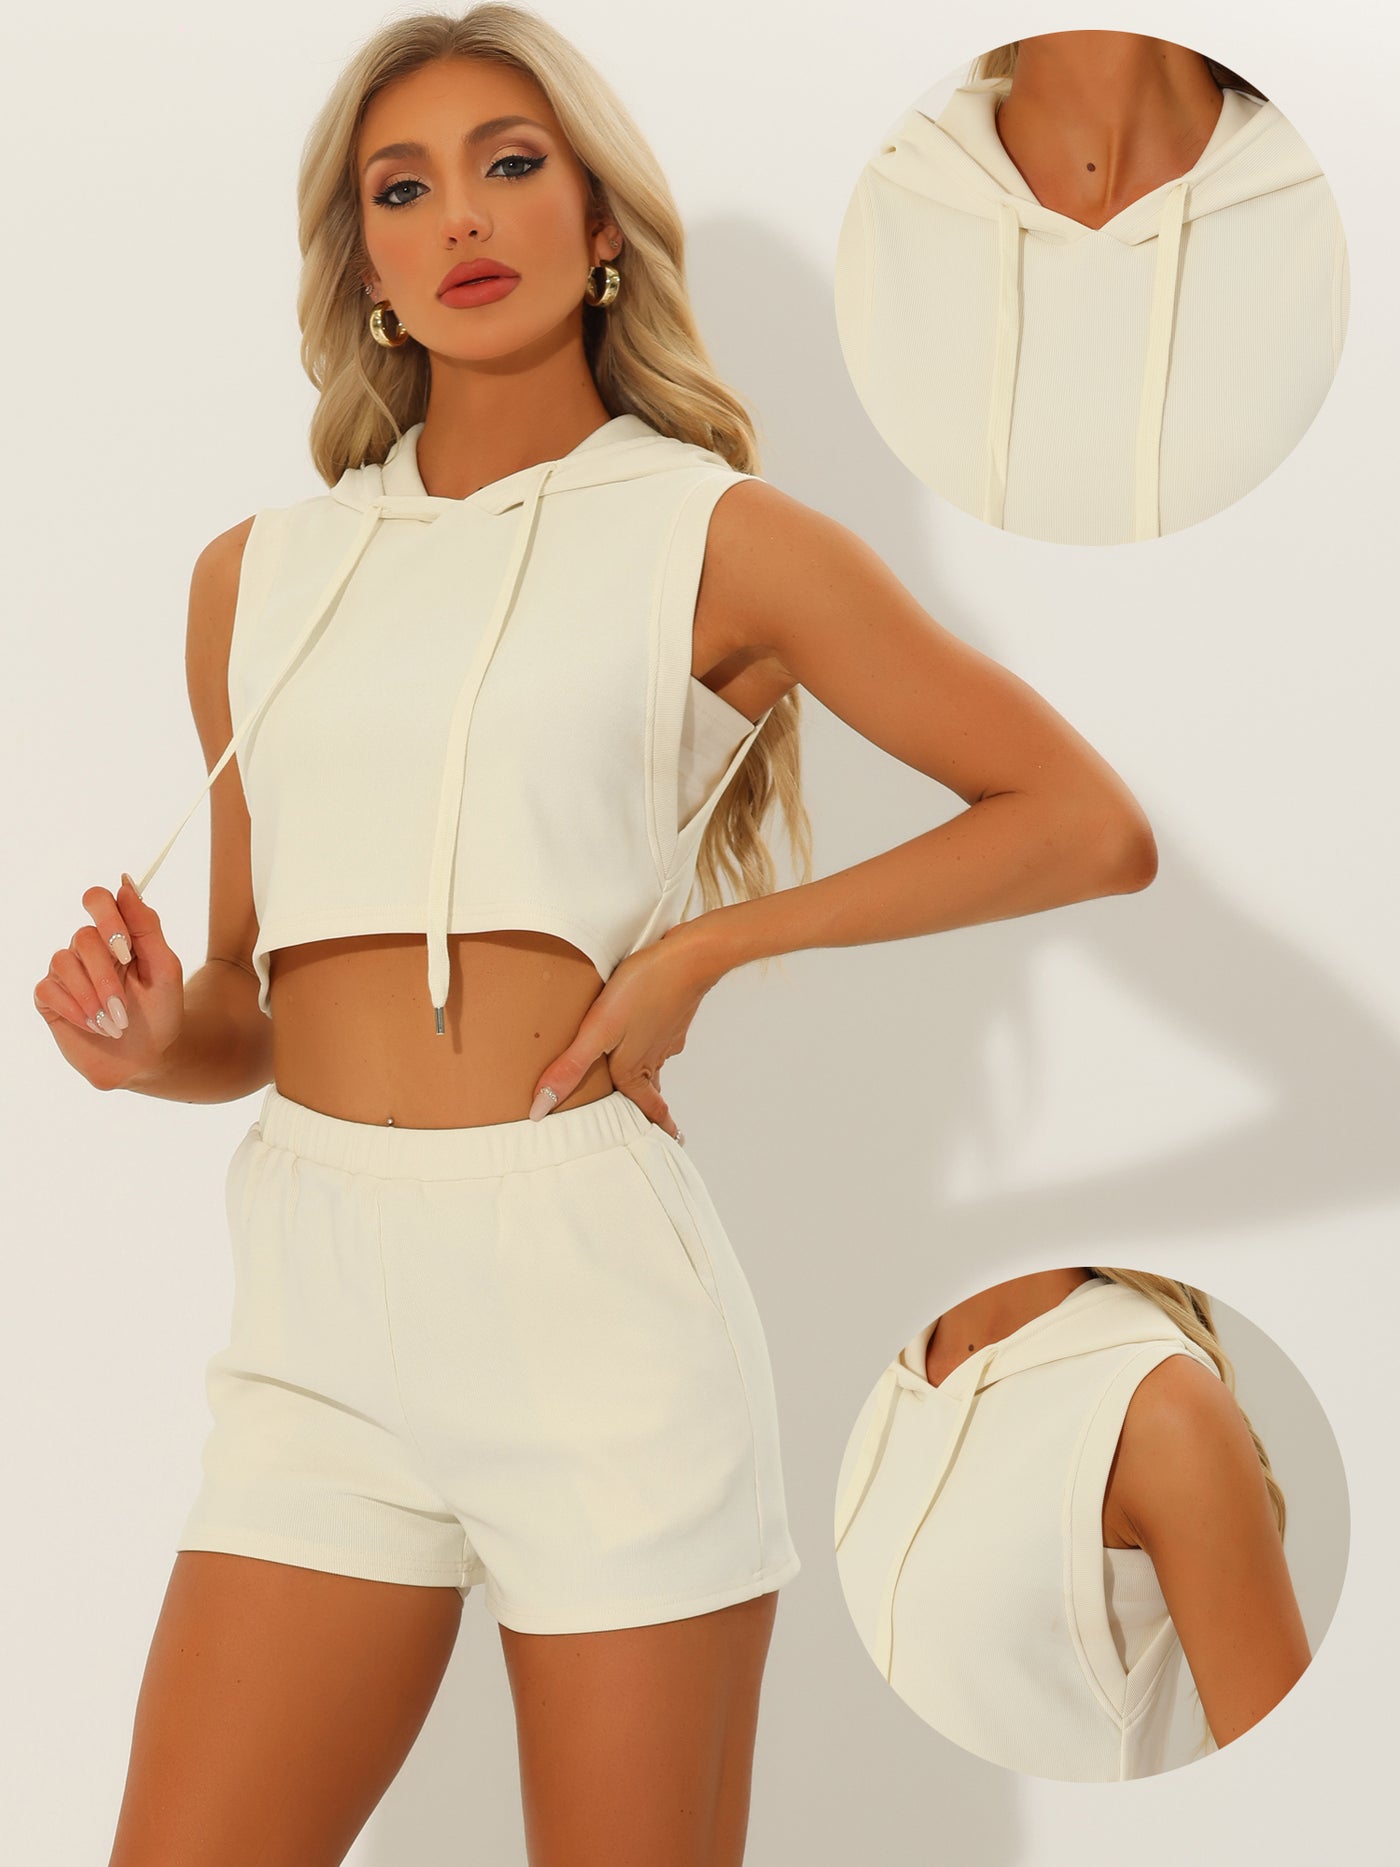 Allegra K 2 Pieces Outfits Hoodie Sleeveless Cropped Top High Waisted Shorts Tracksuit Sets